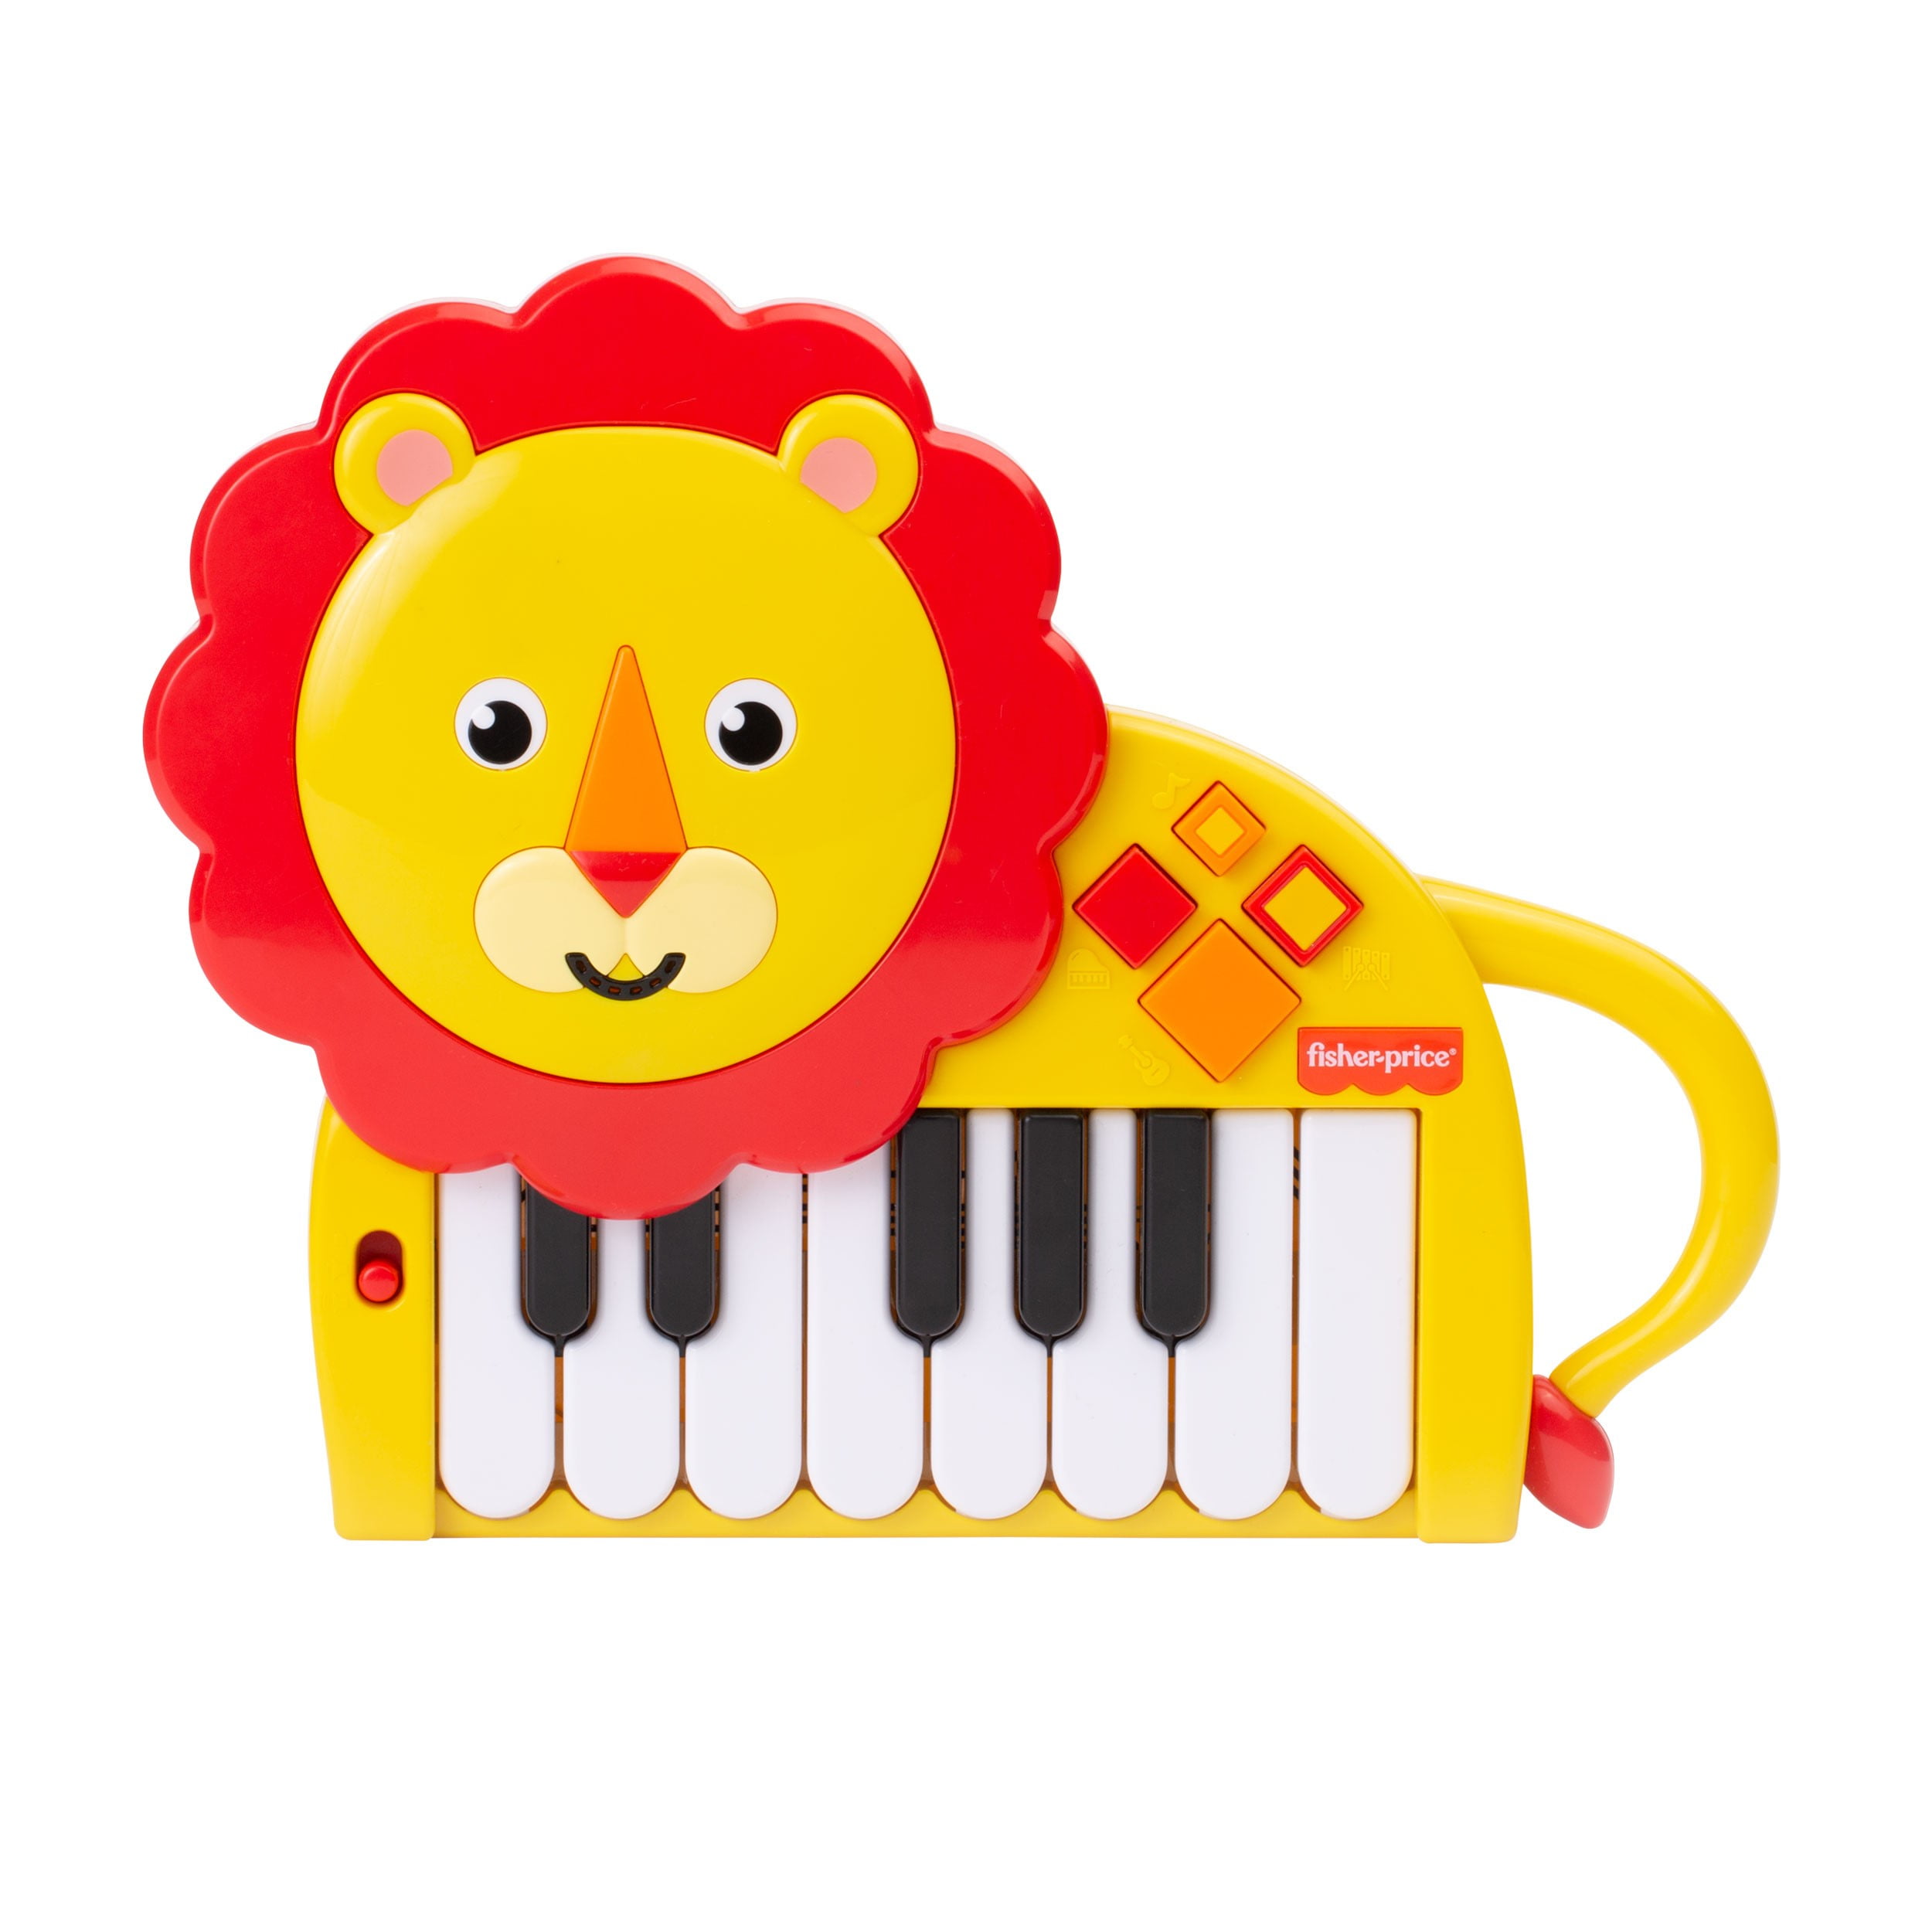 Children's Electronic Music Piano Keyboard w Record & Playback Toy Yellow PS90A 